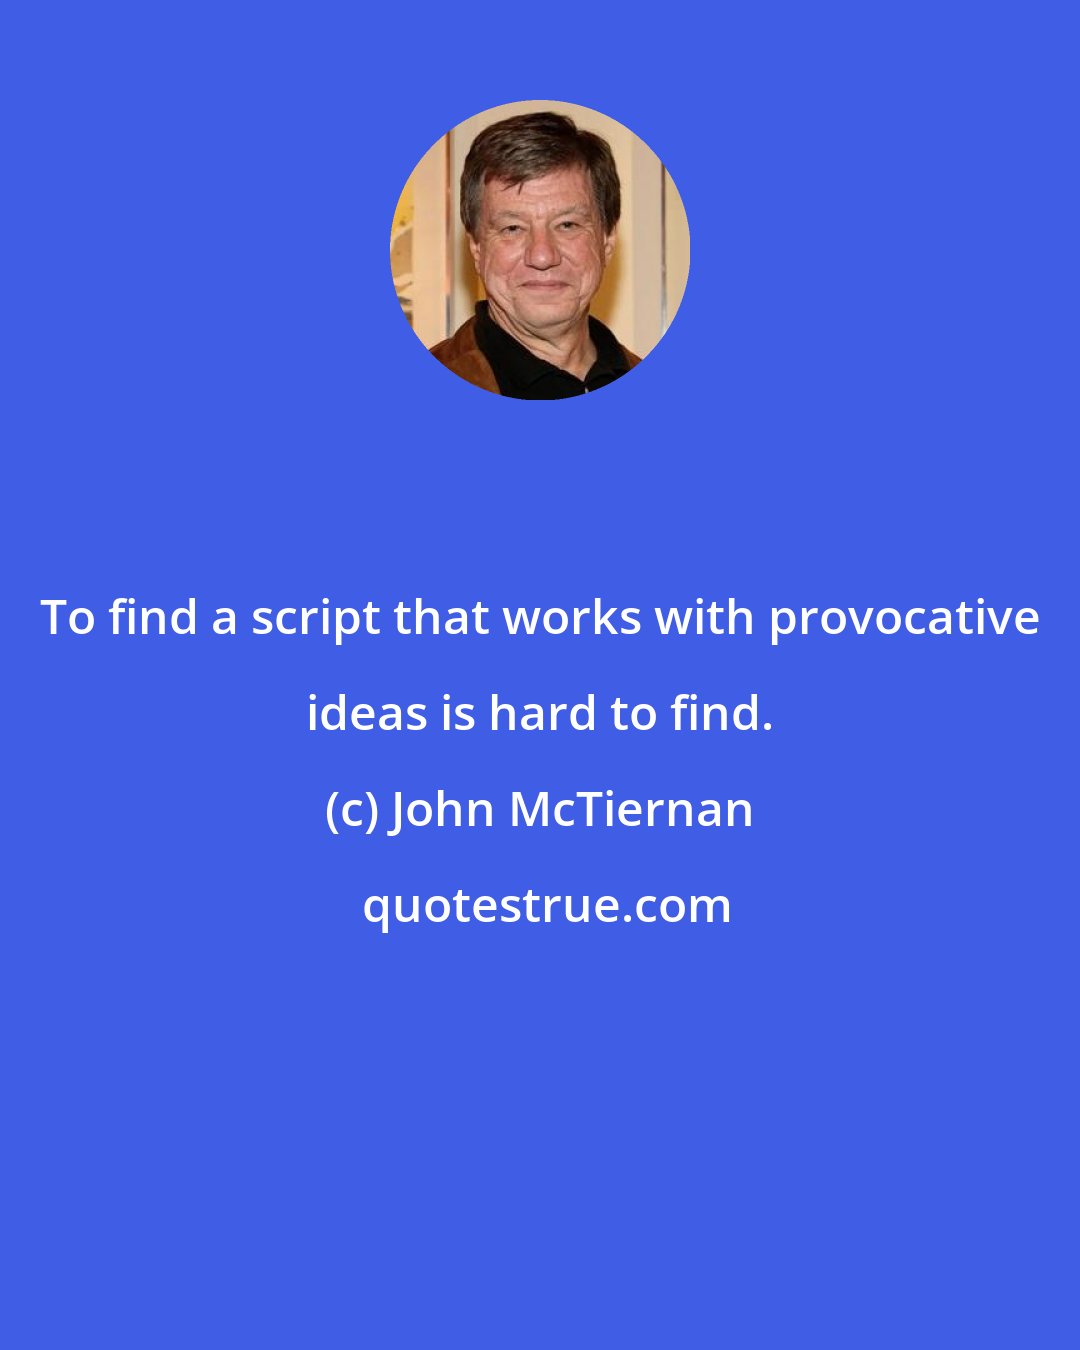 John McTiernan: To find a script that works with provocative ideas is hard to find.